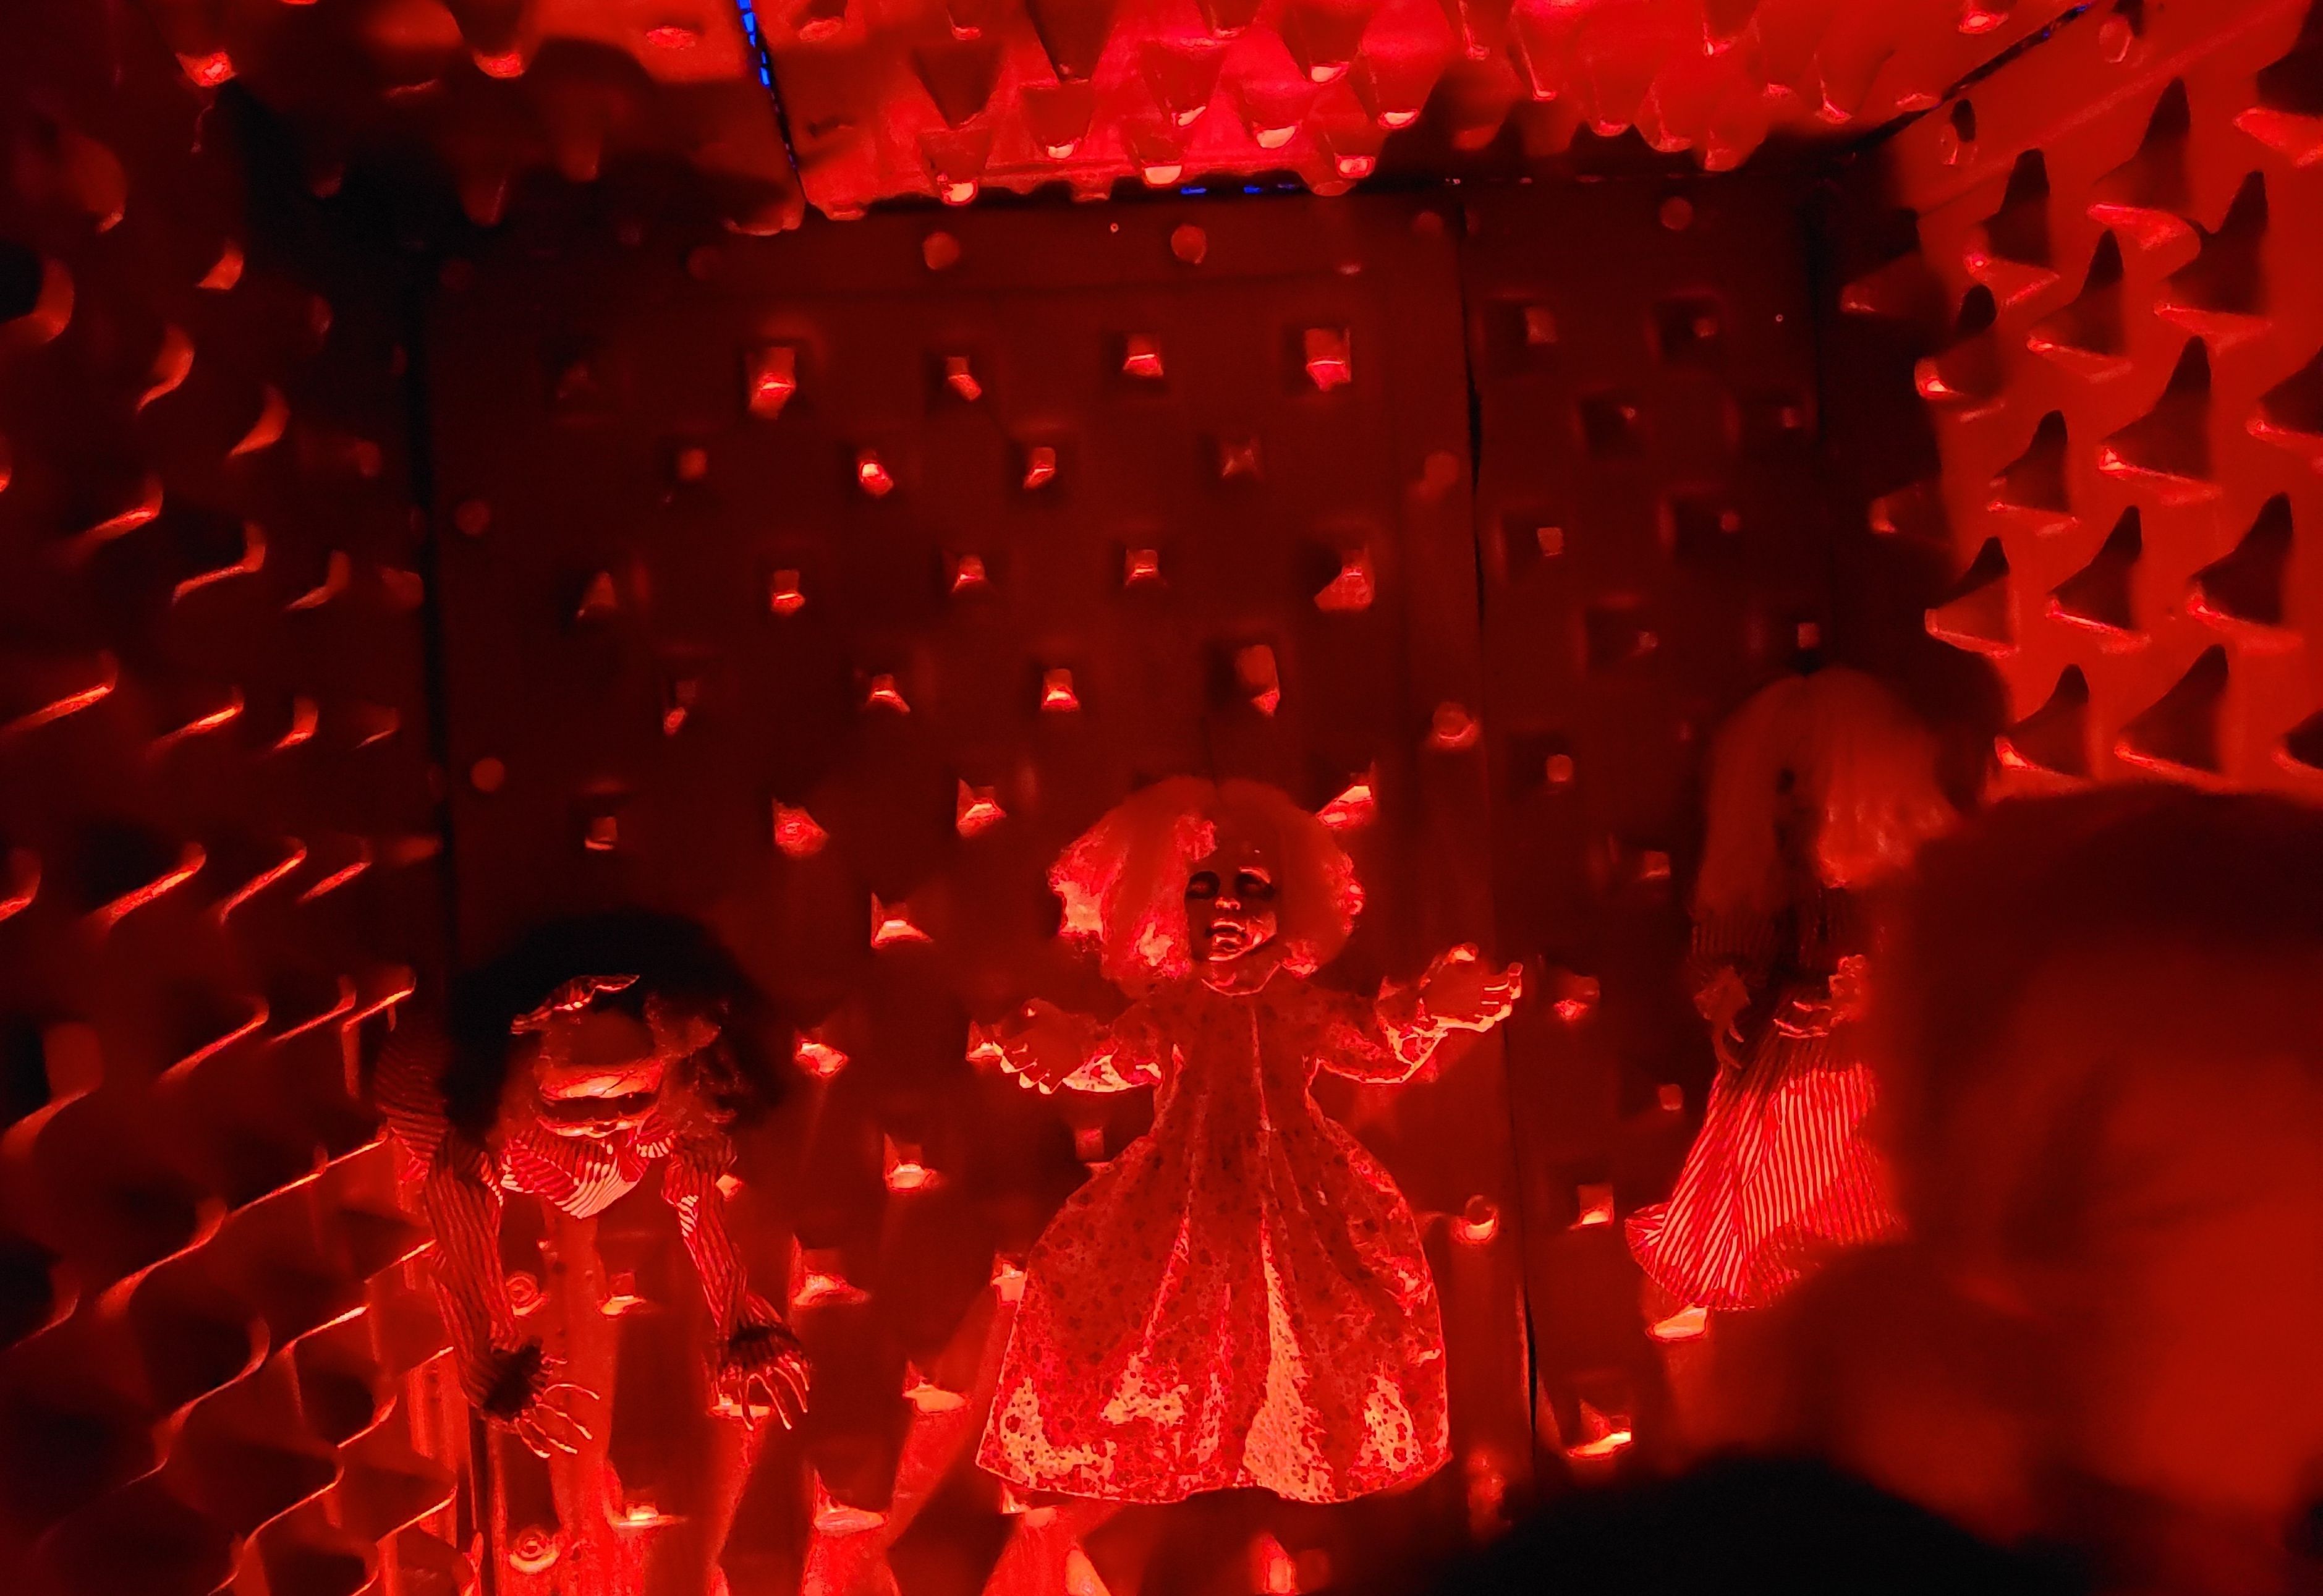 Black and red room with doll in center